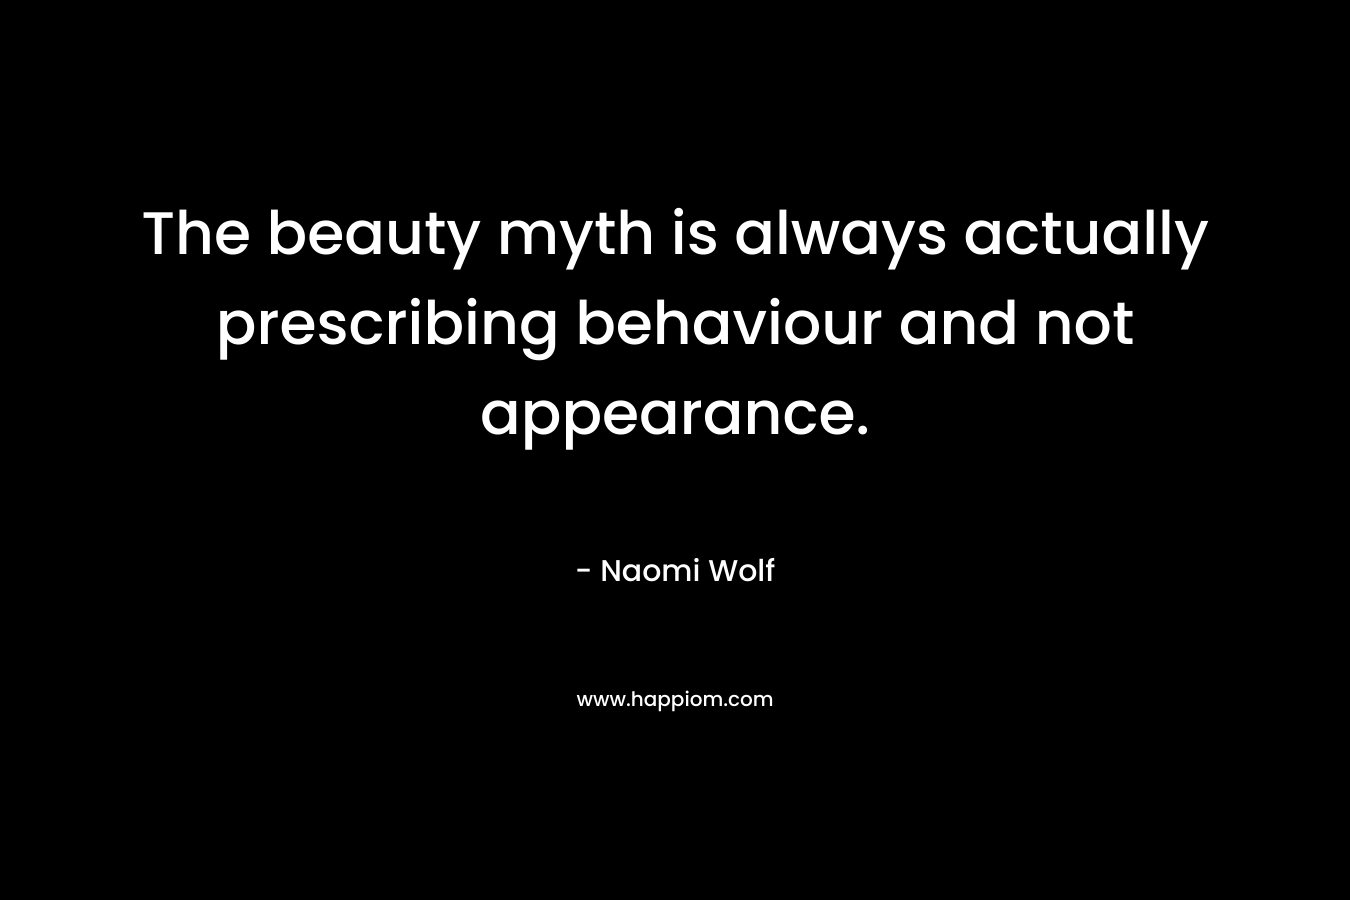 The beauty myth is always actually prescribing behaviour and not appearance.